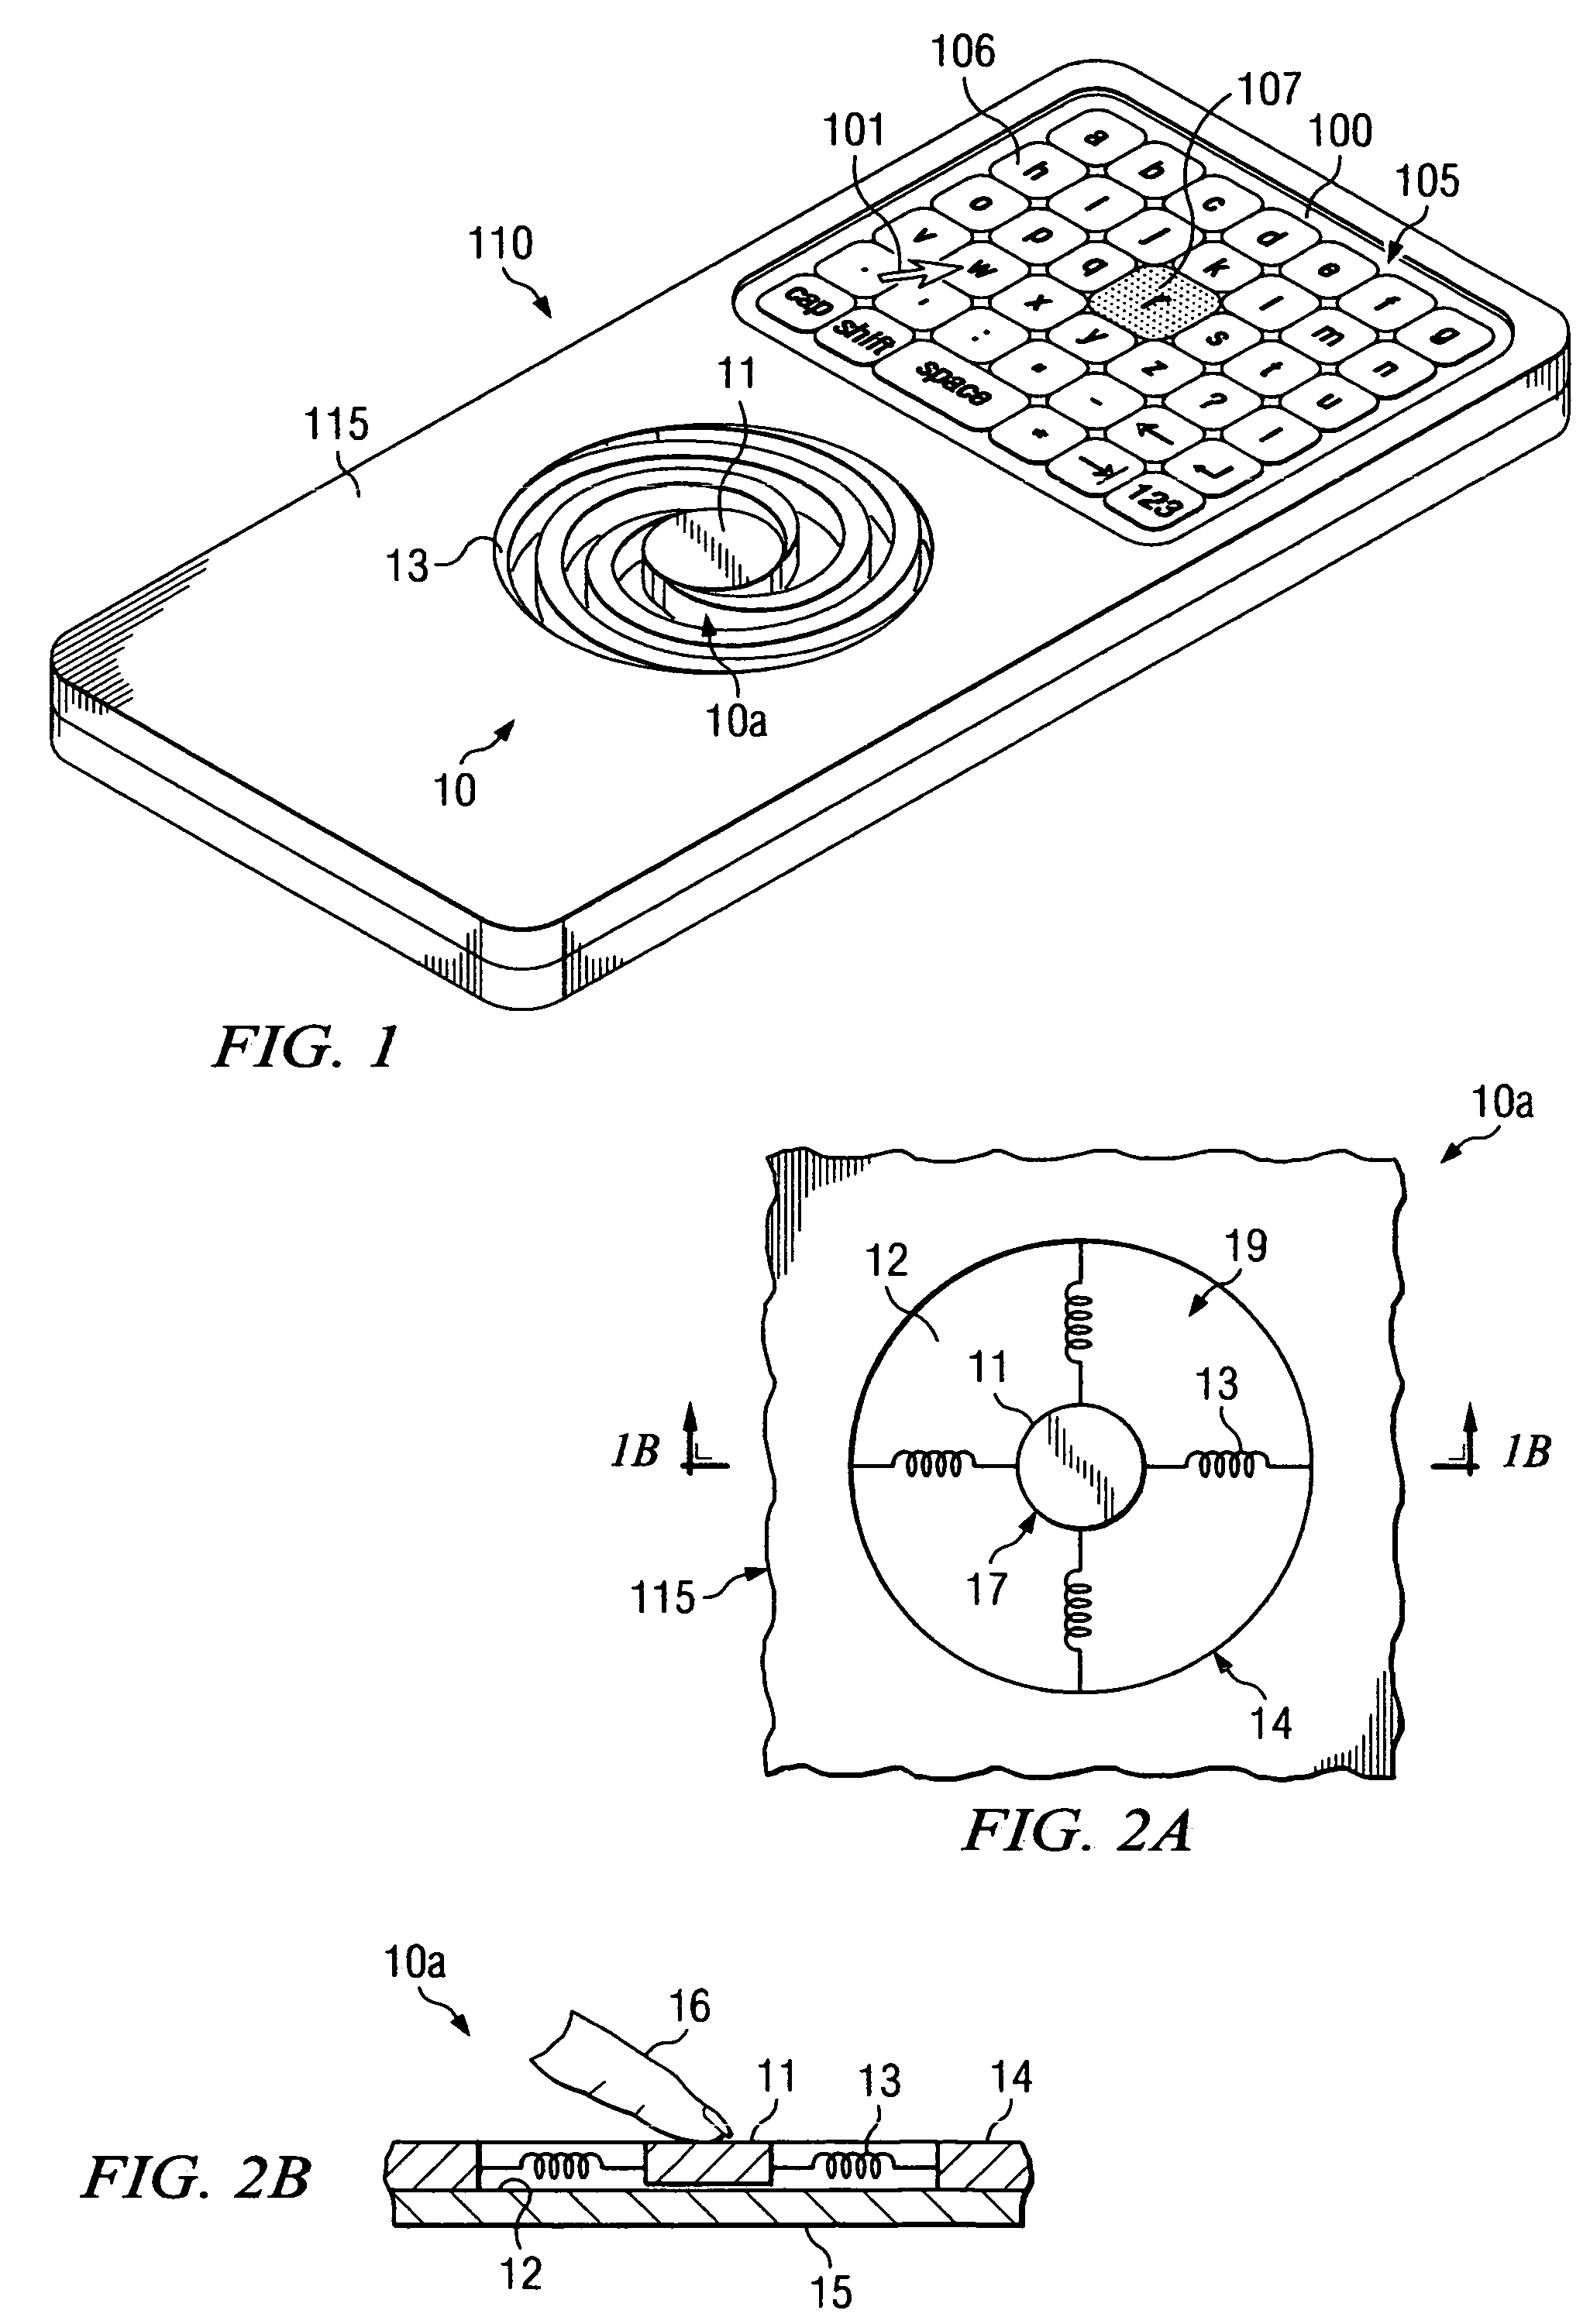 Electronic device and method for simplifying text entry using a soft keyboard